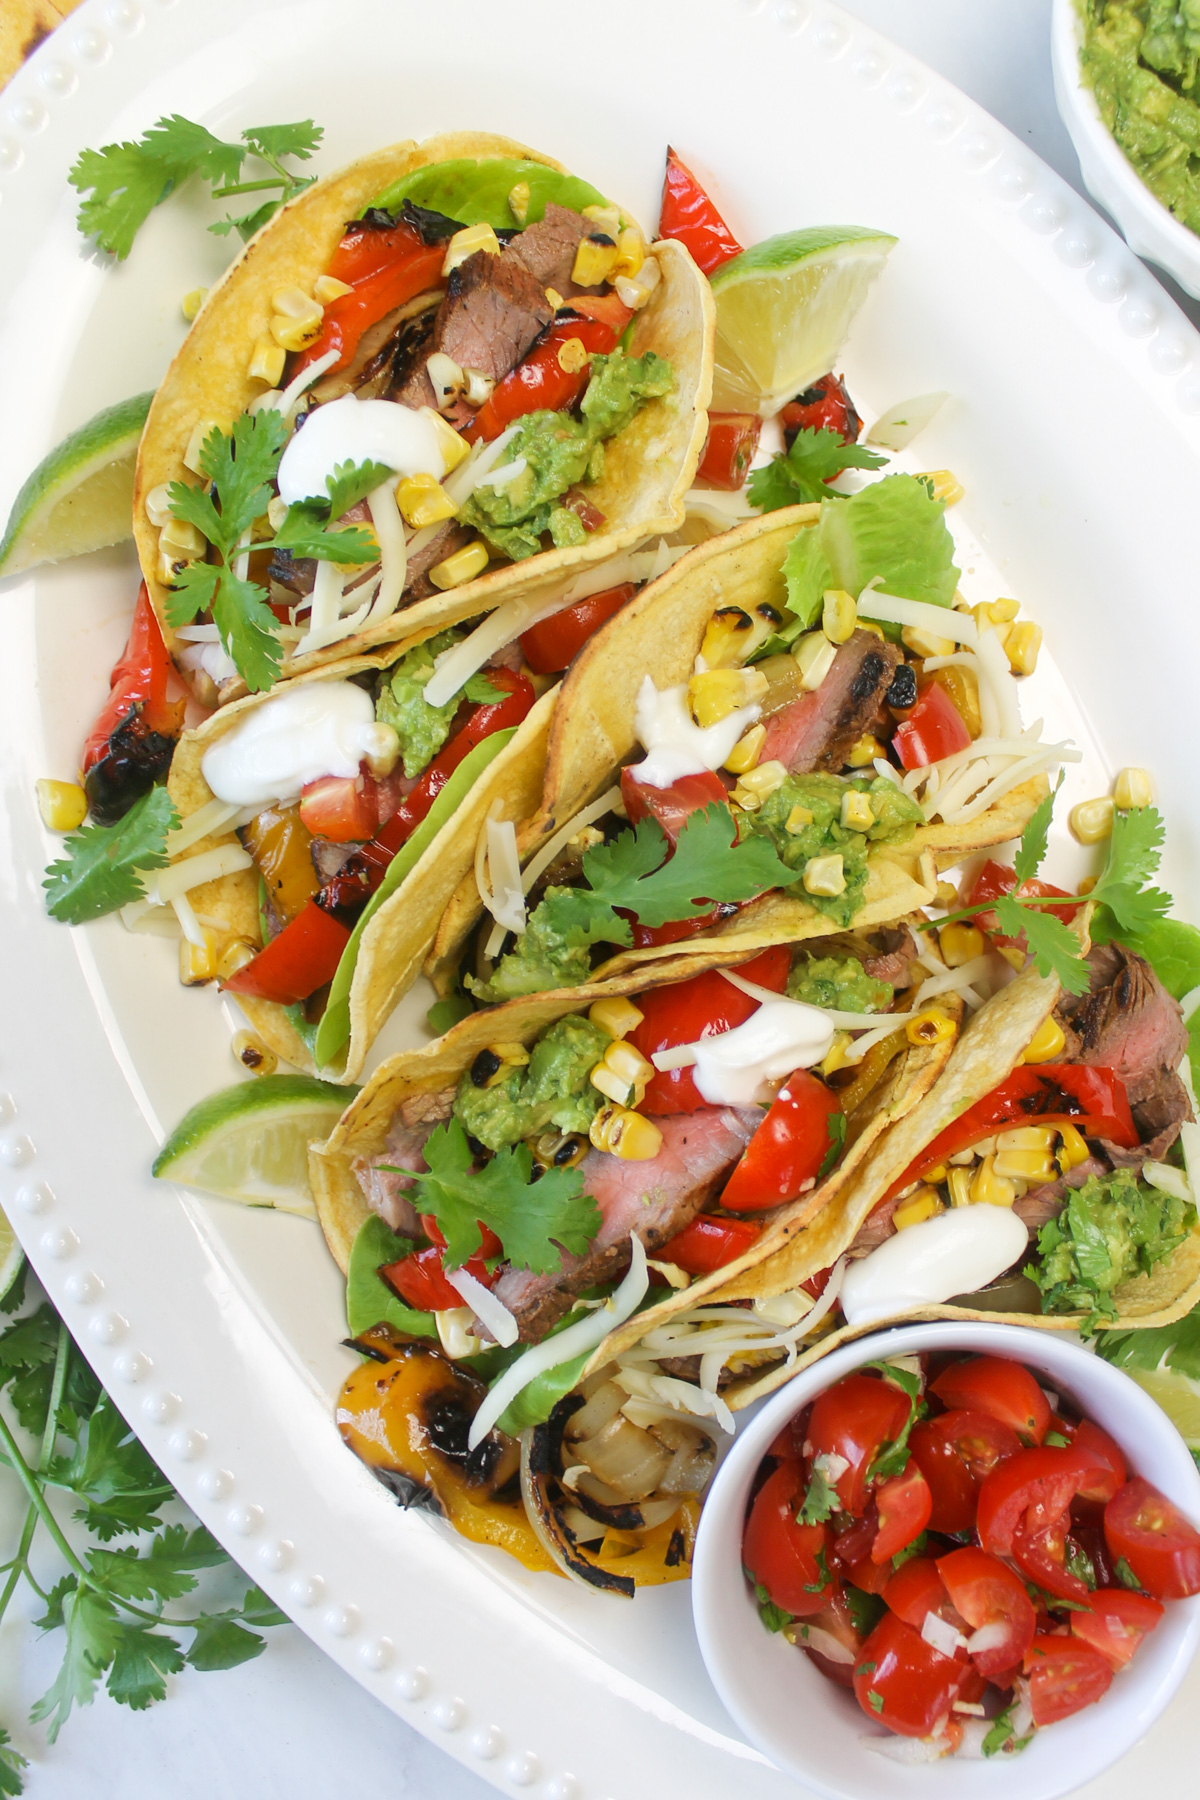 Grilled steak fajita tacos on a platter with a bowl of pico de gallo and garnished with cilantro and lime wedges.